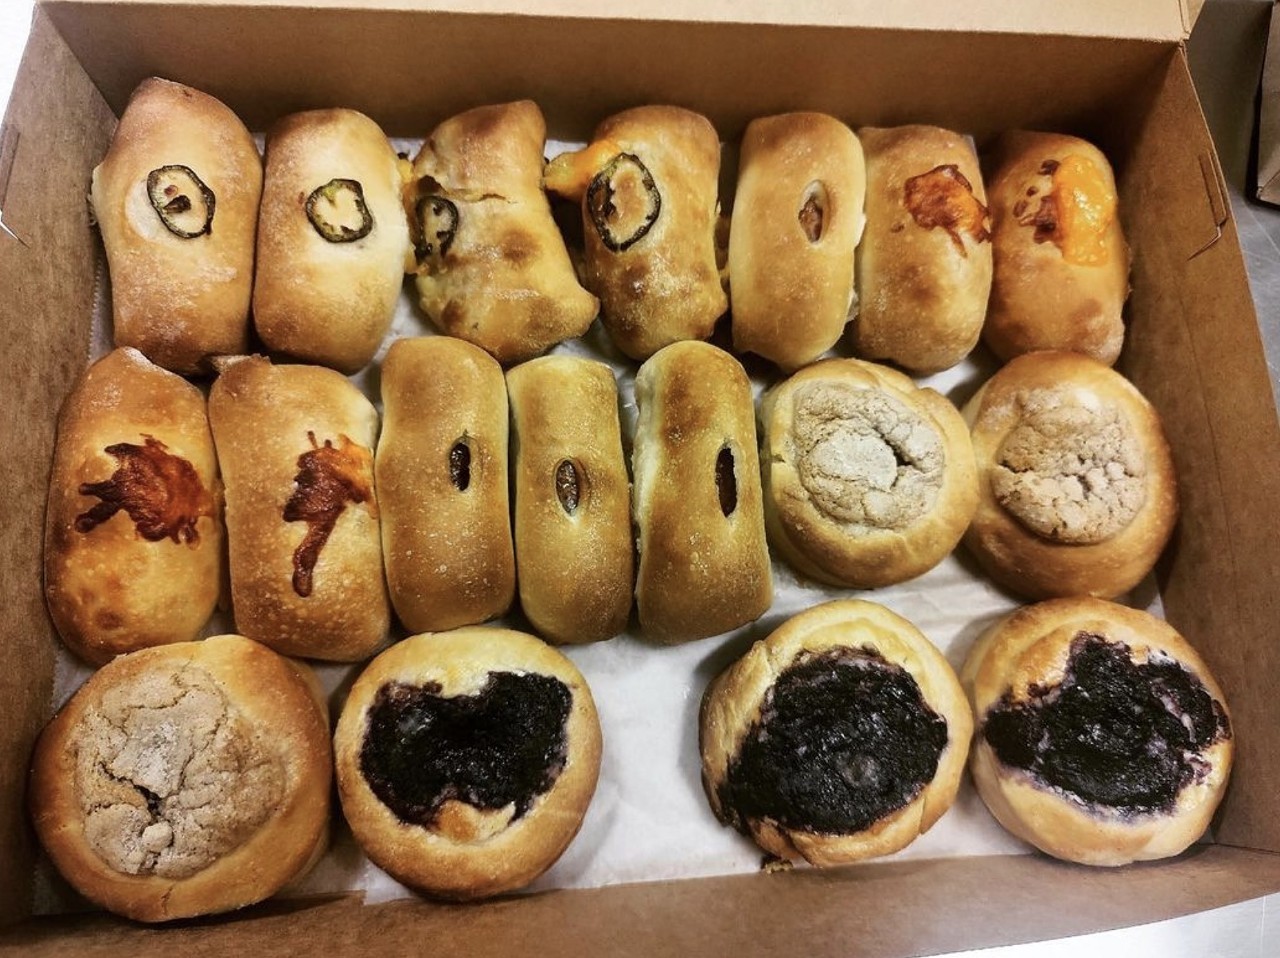 Bexar Kolache Co.
819 Fredericksburg Road
Bexar Kolache Co. closed up shop on Christmas Eve of 2023, but the bakery’s founder Emily Stone indicated she plans to relocate the business. “We’ll be back soon, #satx," an Instagram post announcing the closure read. “my goal was to breathe life into SA’s historic buildings by filling a cultural gap in our food scene. I’ve now done it in 2 locations. Where will I renovate next?”